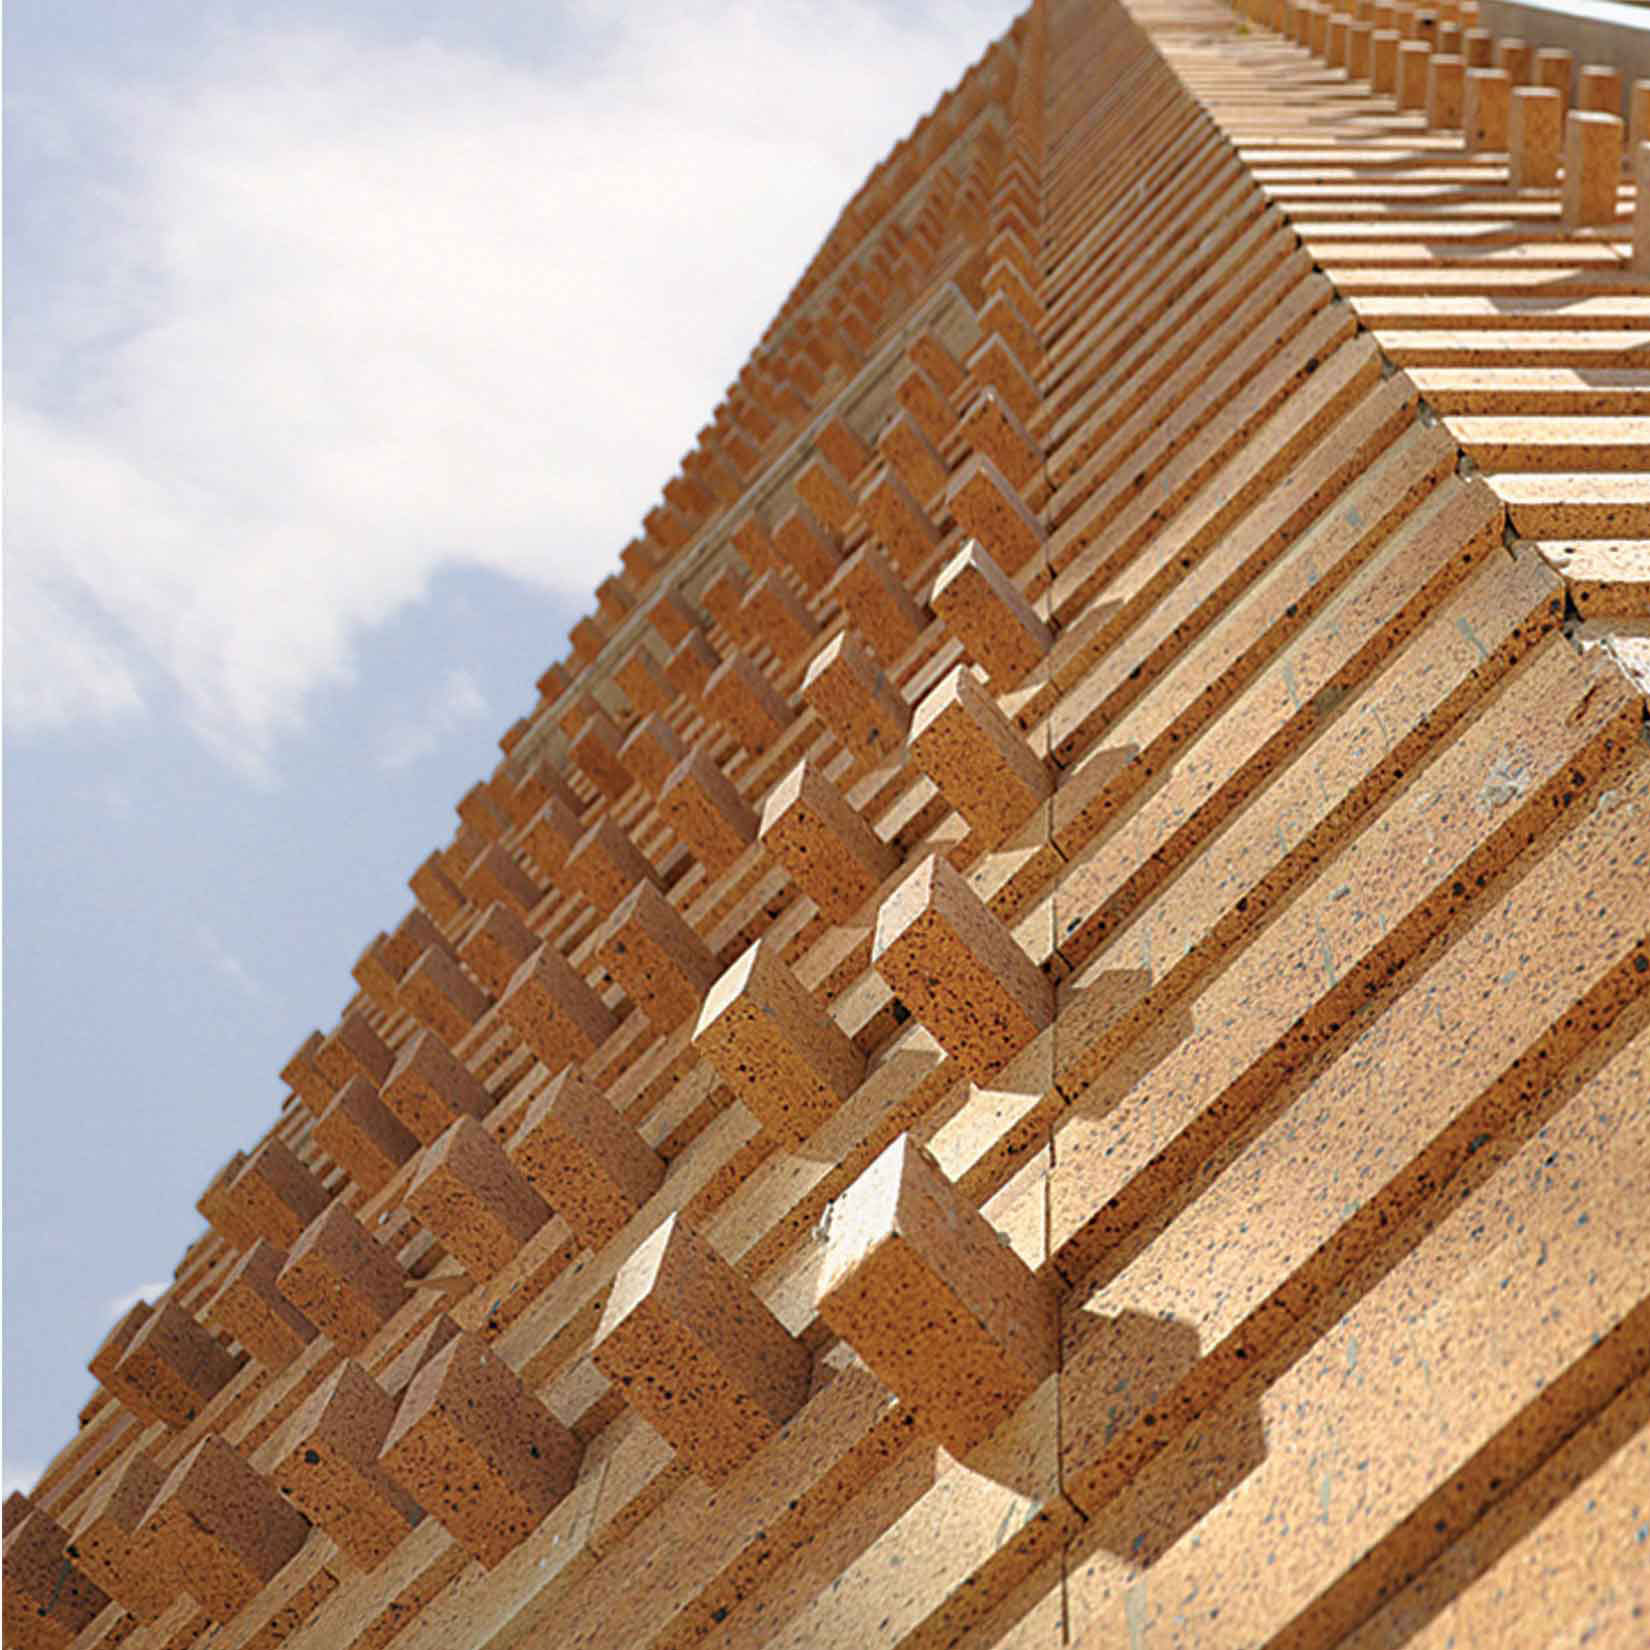 Brick facade project of residential complex - Isfahan of azarakhsh brick